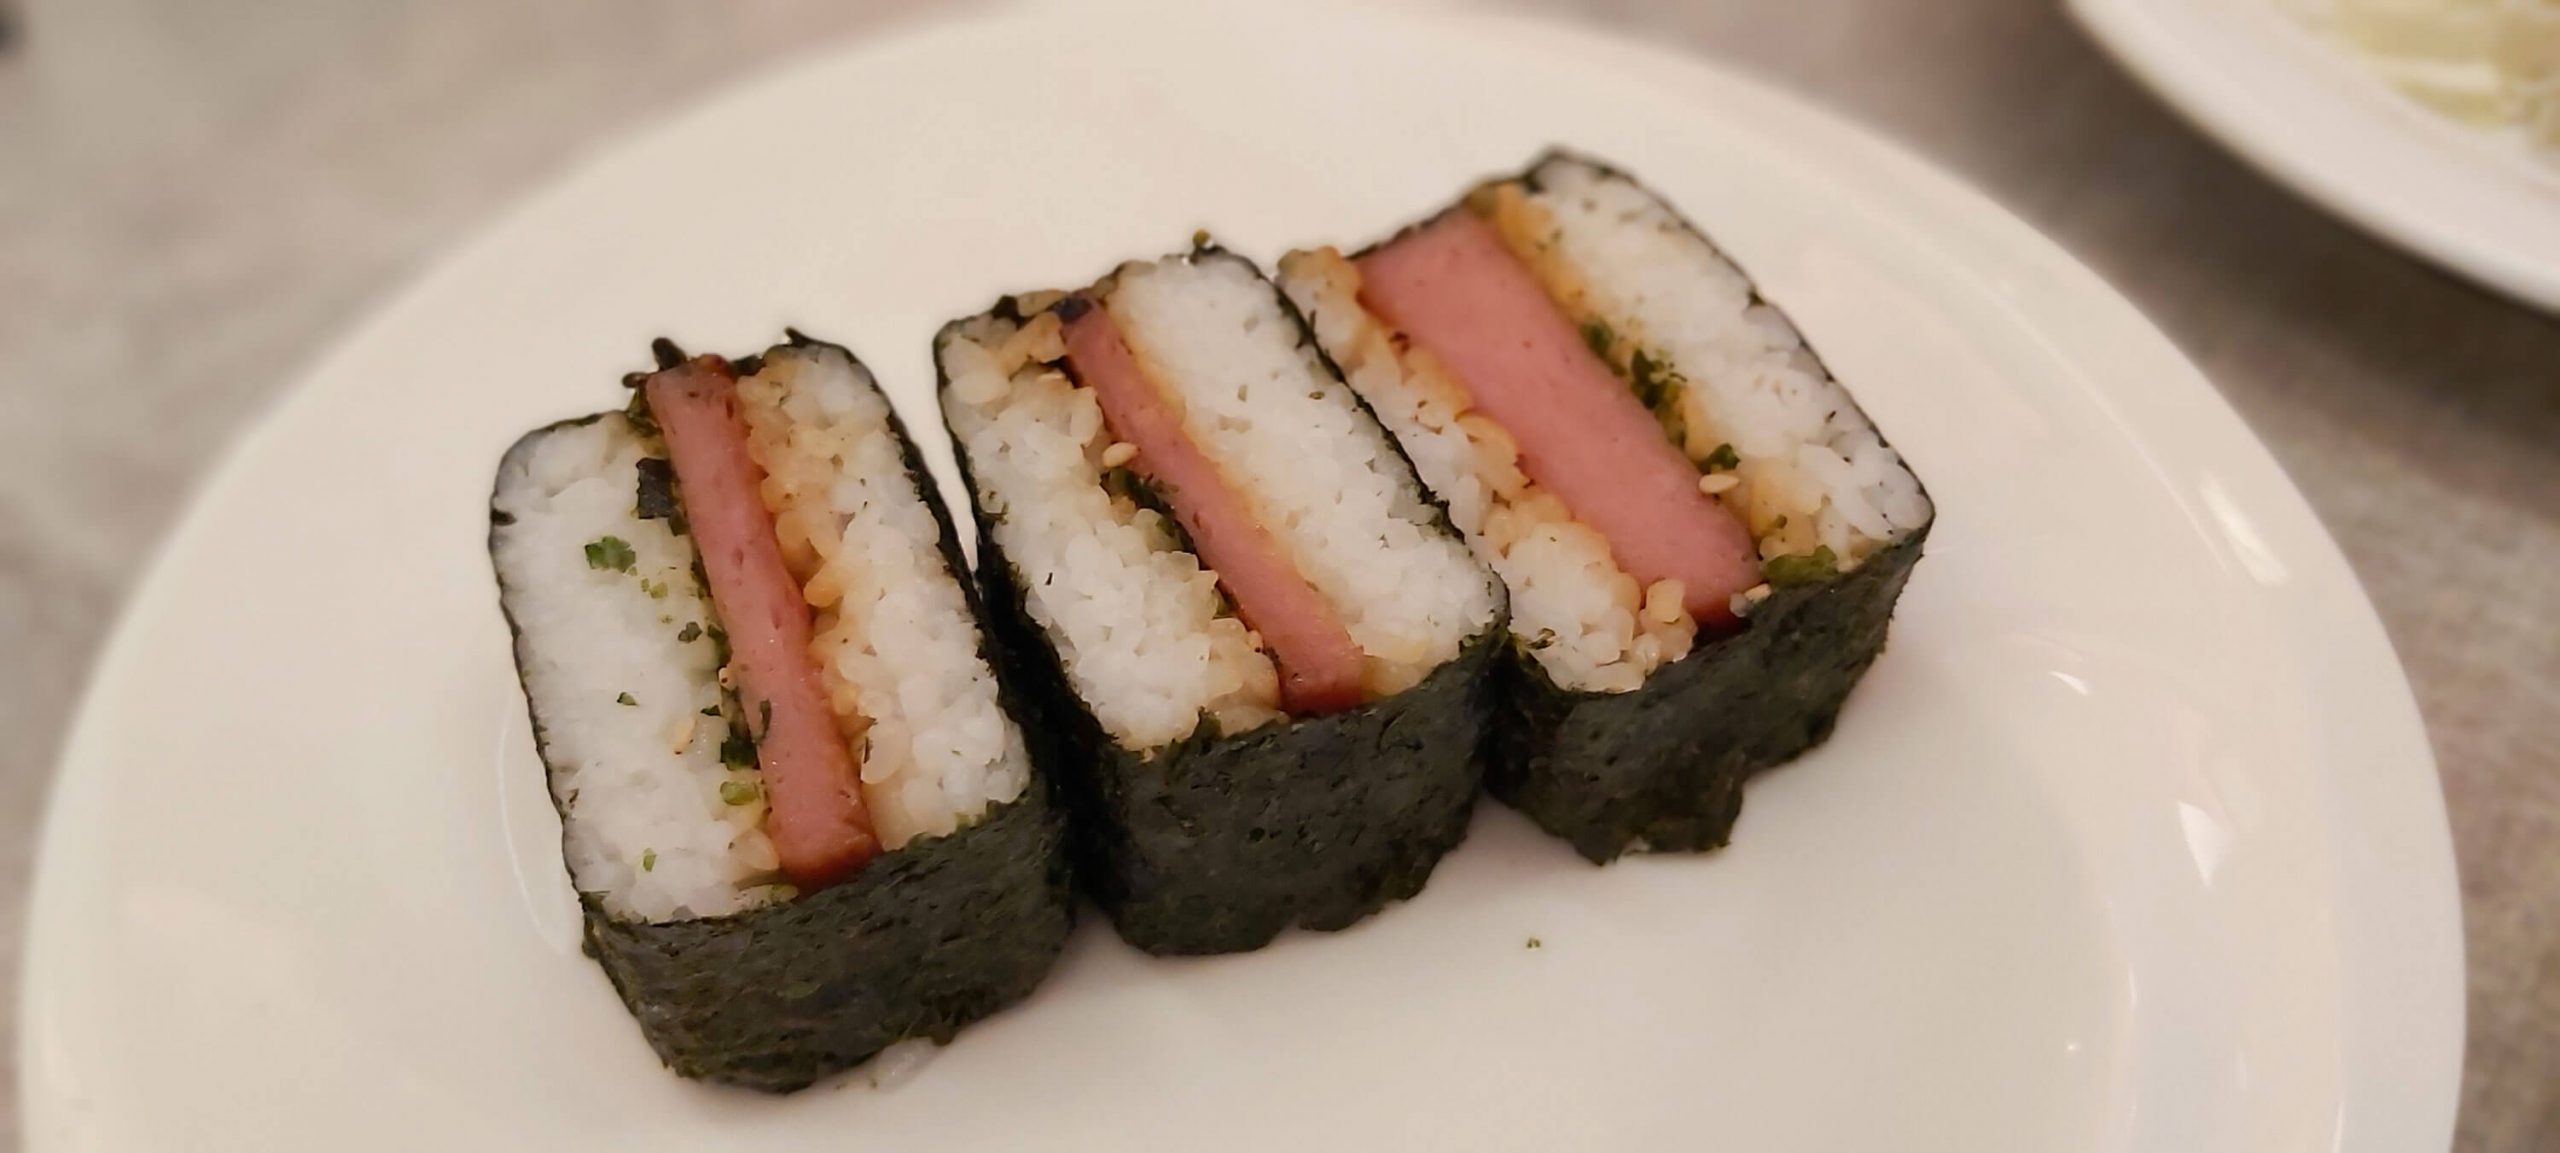 SPAM MUSUBI. This is a popular snack in Hawaii. The dish is made of spam on top of a block of rice and wrapped with nori.